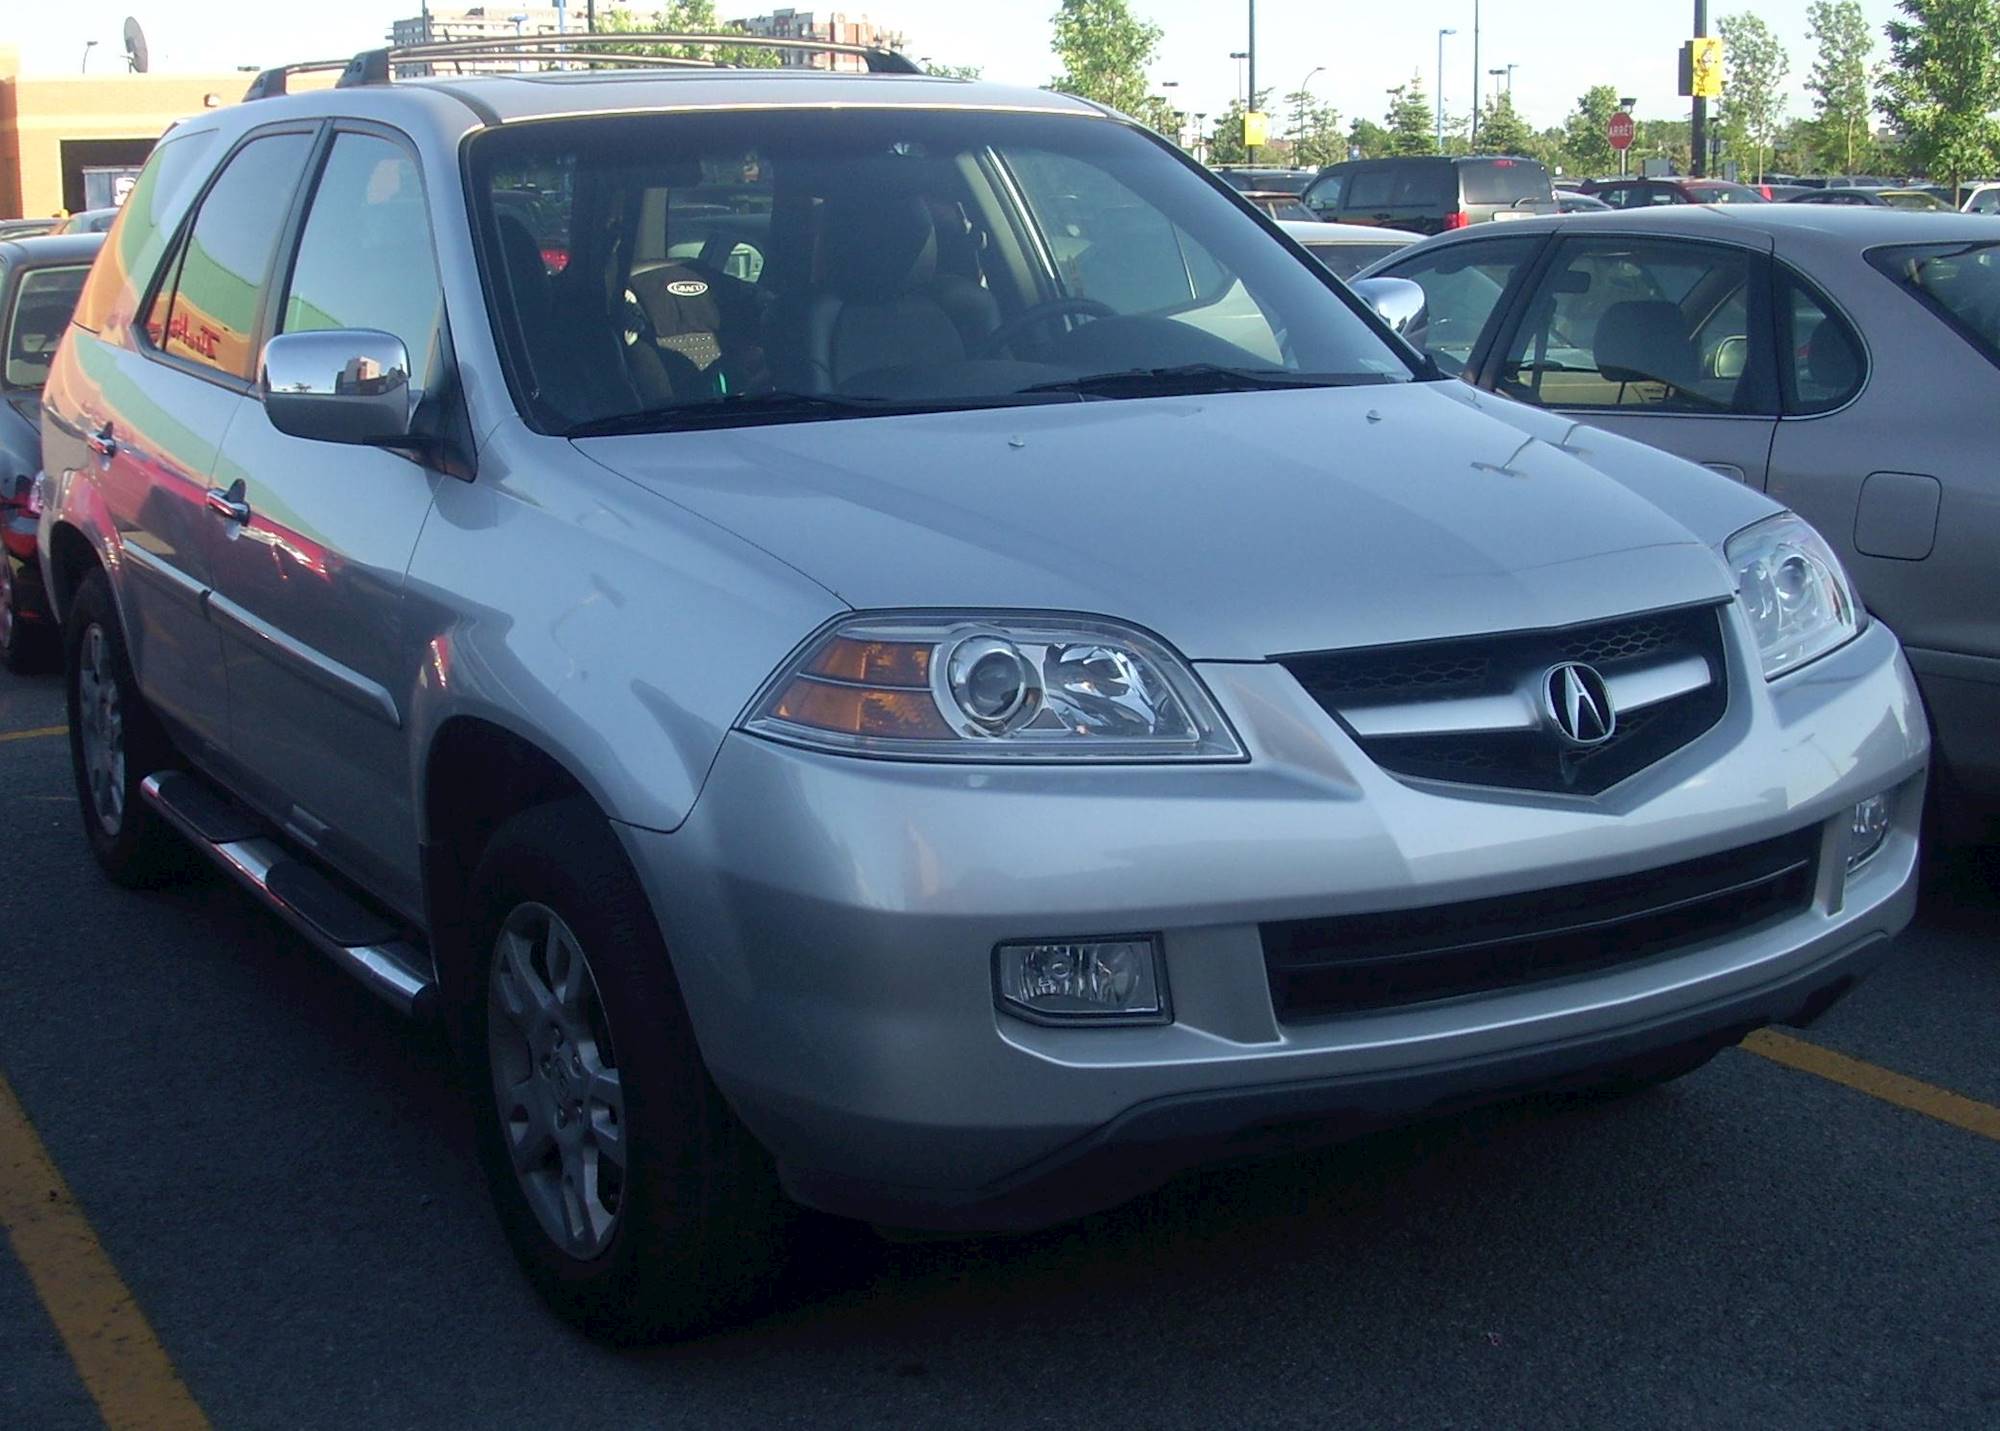 2006 Acura Mdx Touring 4dr Suv 35l V6 Awd Auto Wentertainment System